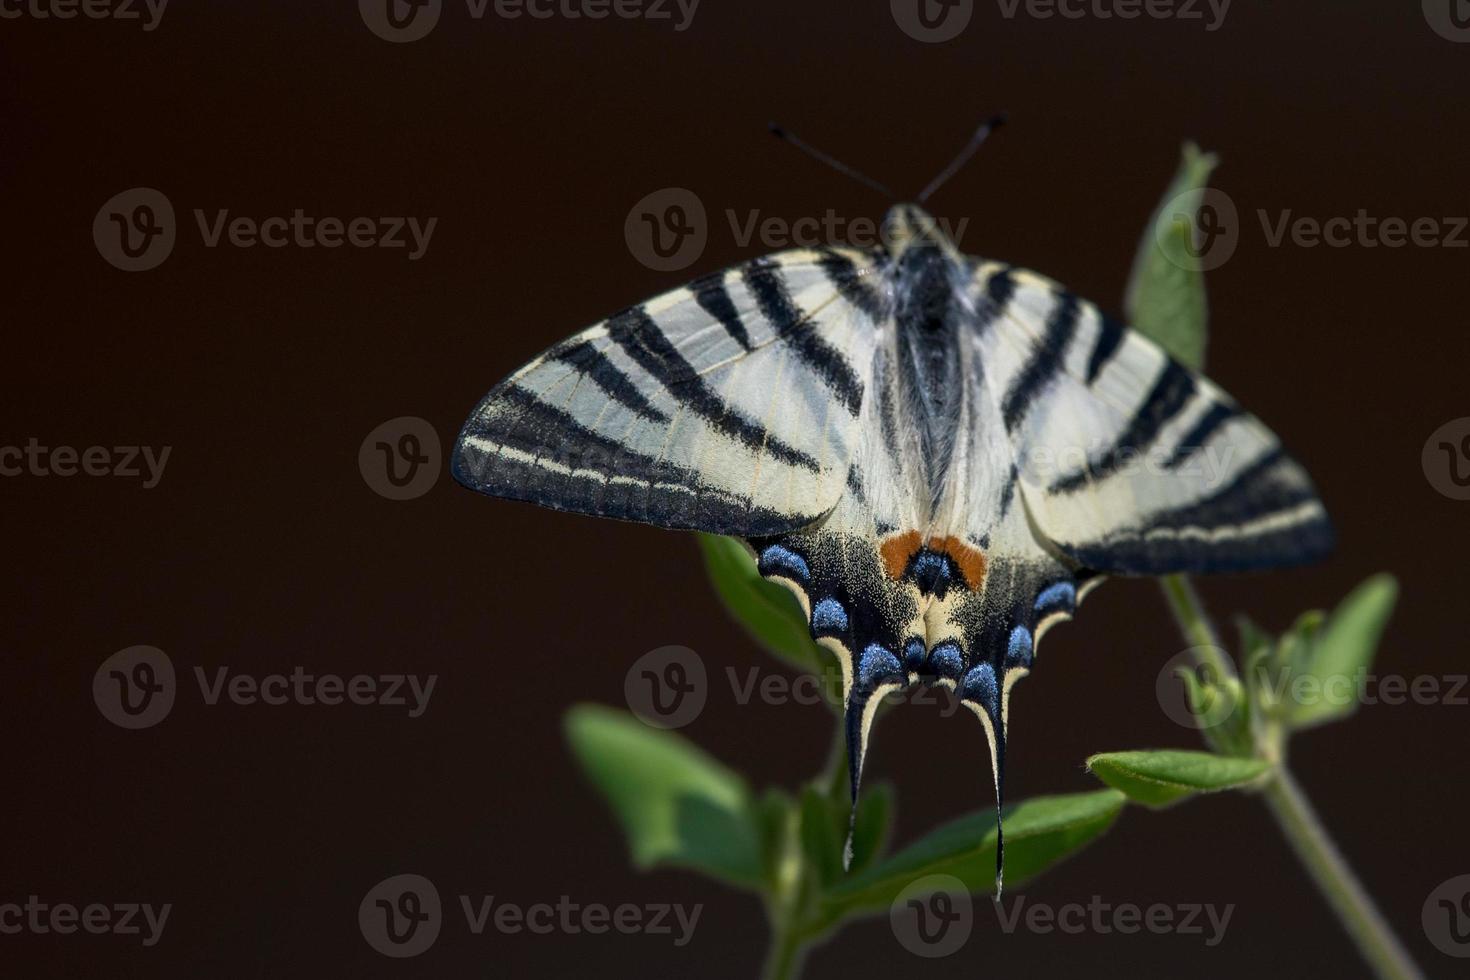 swallow tail butterfly machaon close up portrait photo